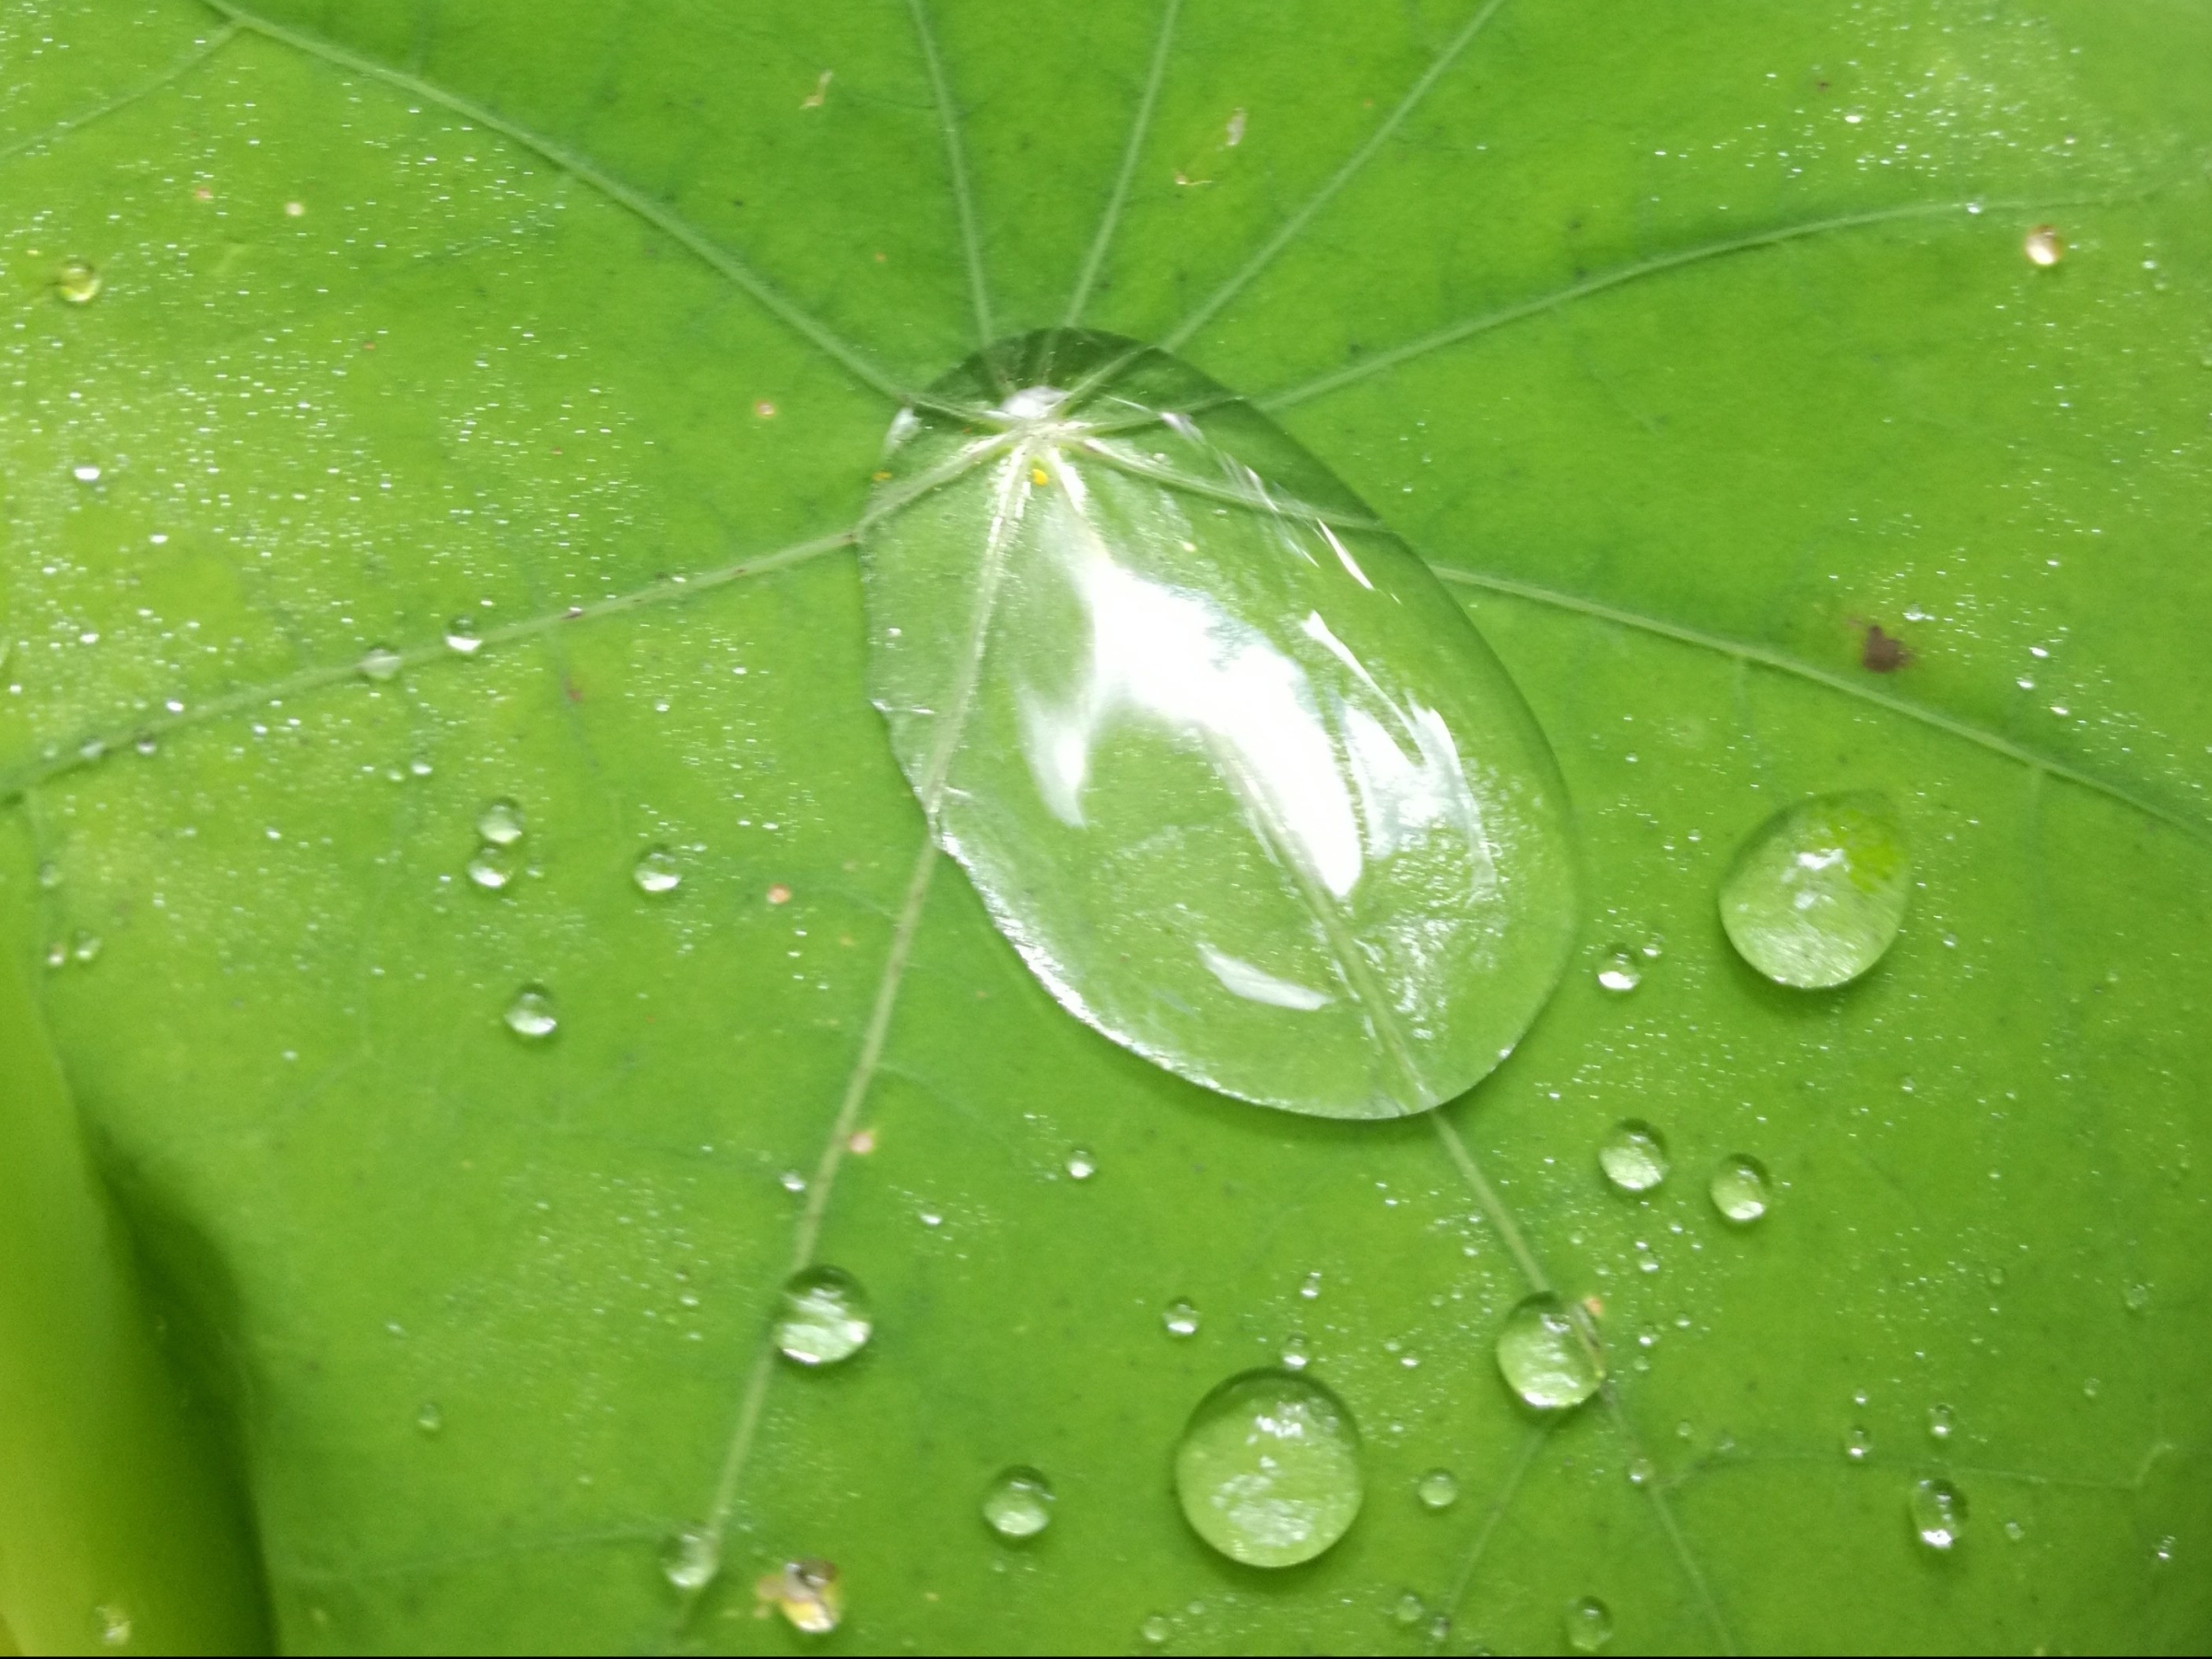 Nasturtium leaves gather little galaxies of water droplets after rain.